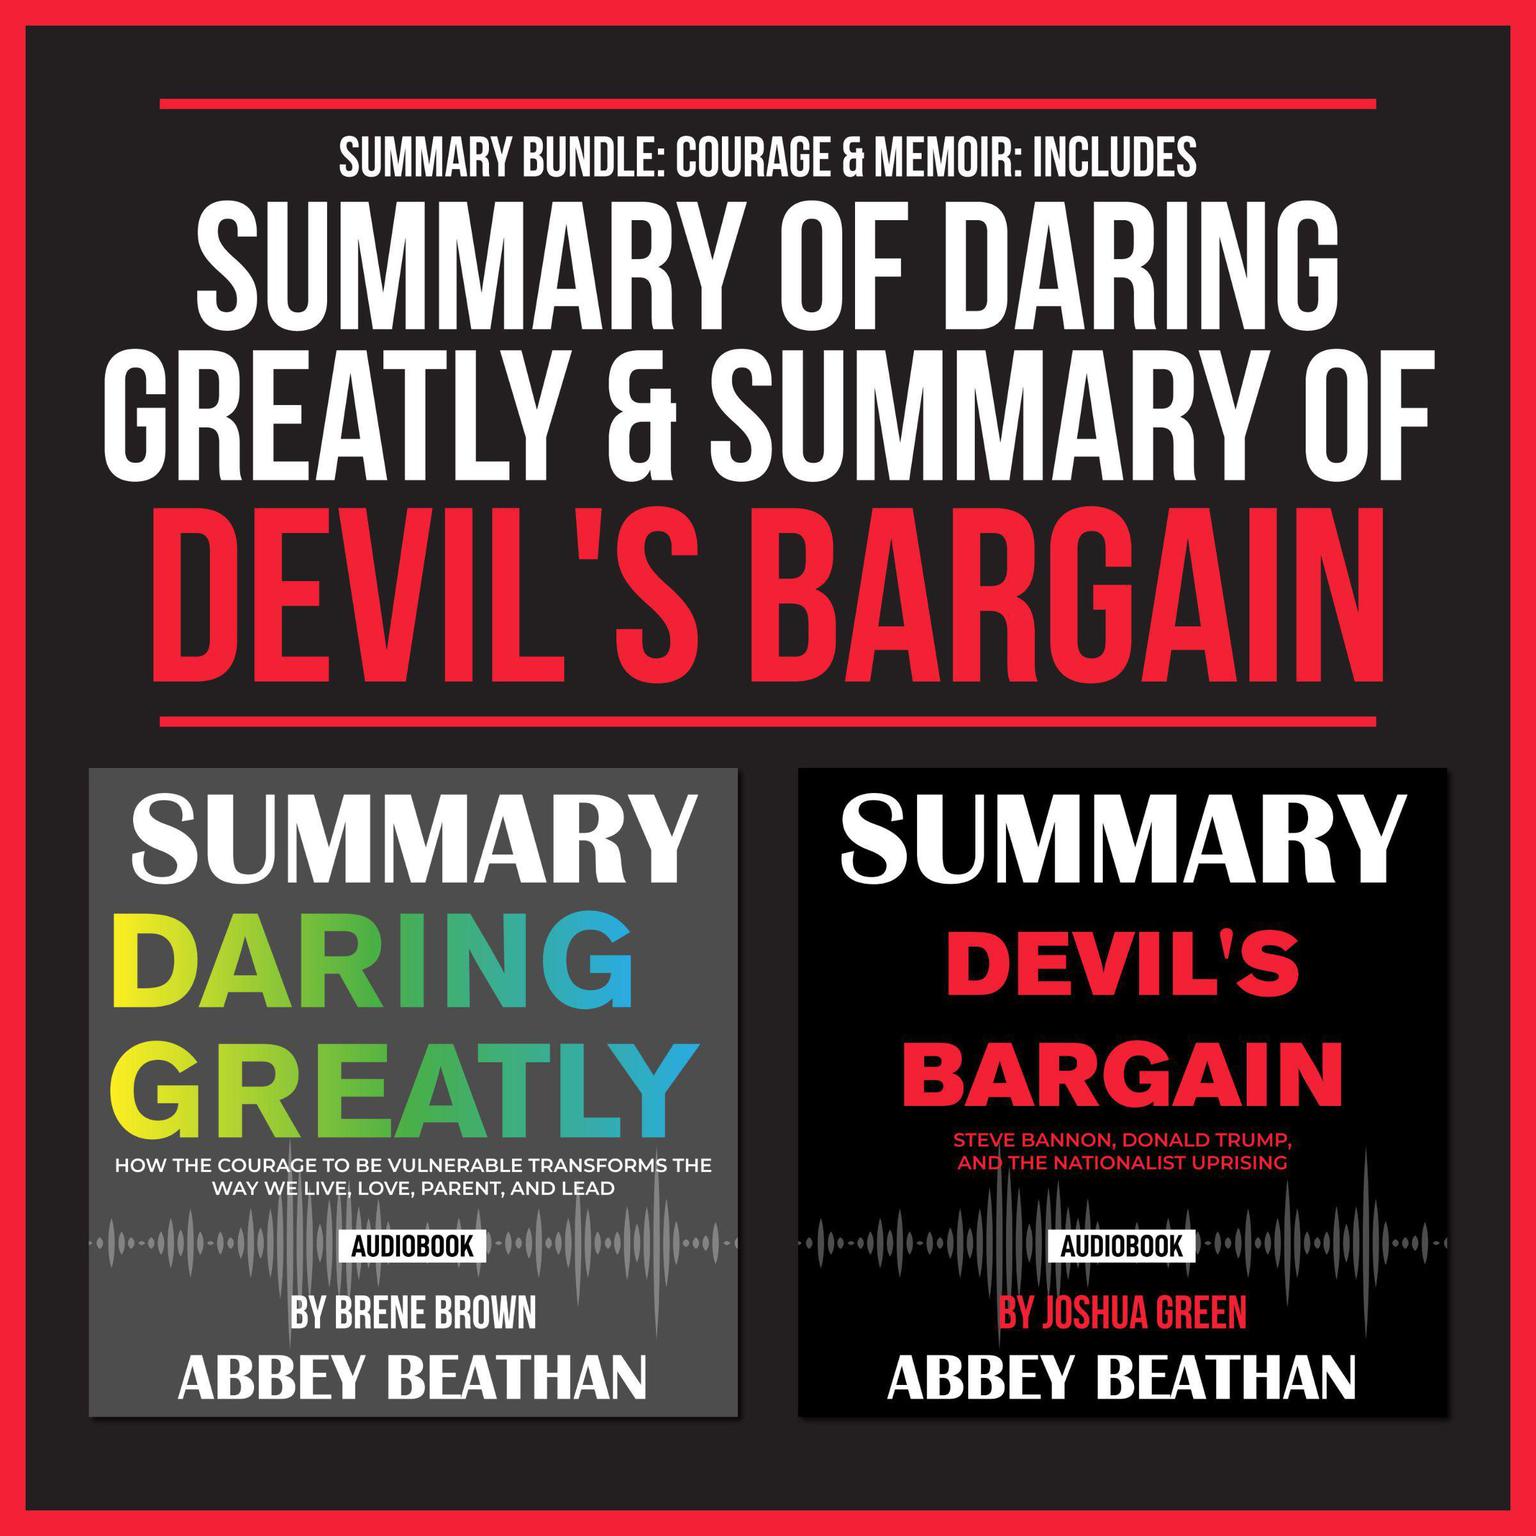 Summary Bundle: Courage & Memoir: Includes Summary of Daring Greatly & Summary of Devils Bargain Audiobook, by Abbey Beathan